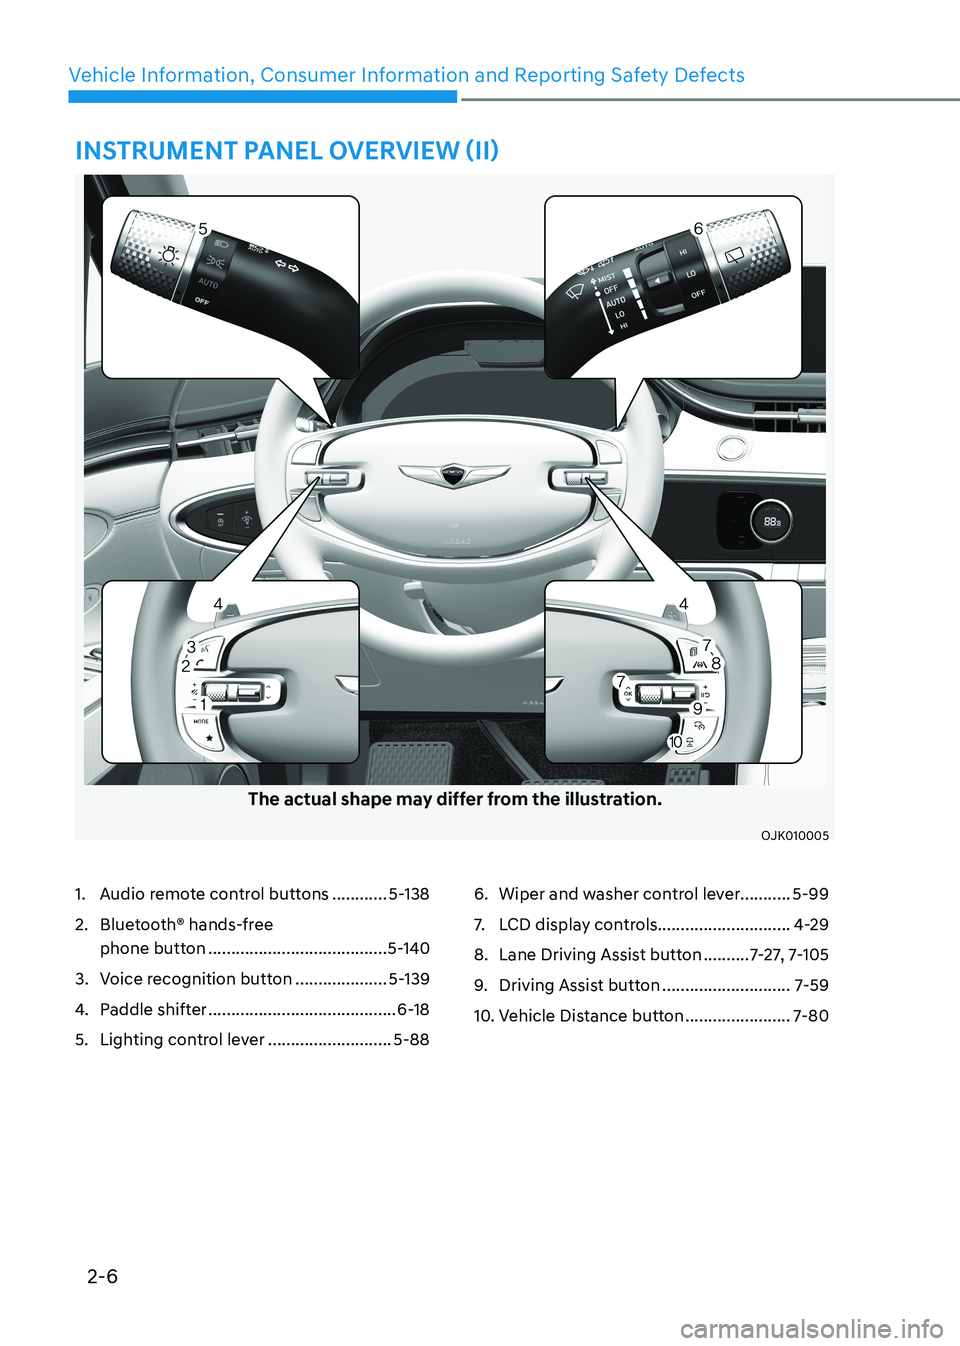 HYUNDAI GENESIS GV70 2021  Owners Manual 2-6
Vehicle Information, Consumer Information and Reporting Safety Defects
INSTRUMENT PANEL OVERVIEW (II)
The actual shape may differ from the illustration.
OJK010005OJK010005
1. Audio remote control 